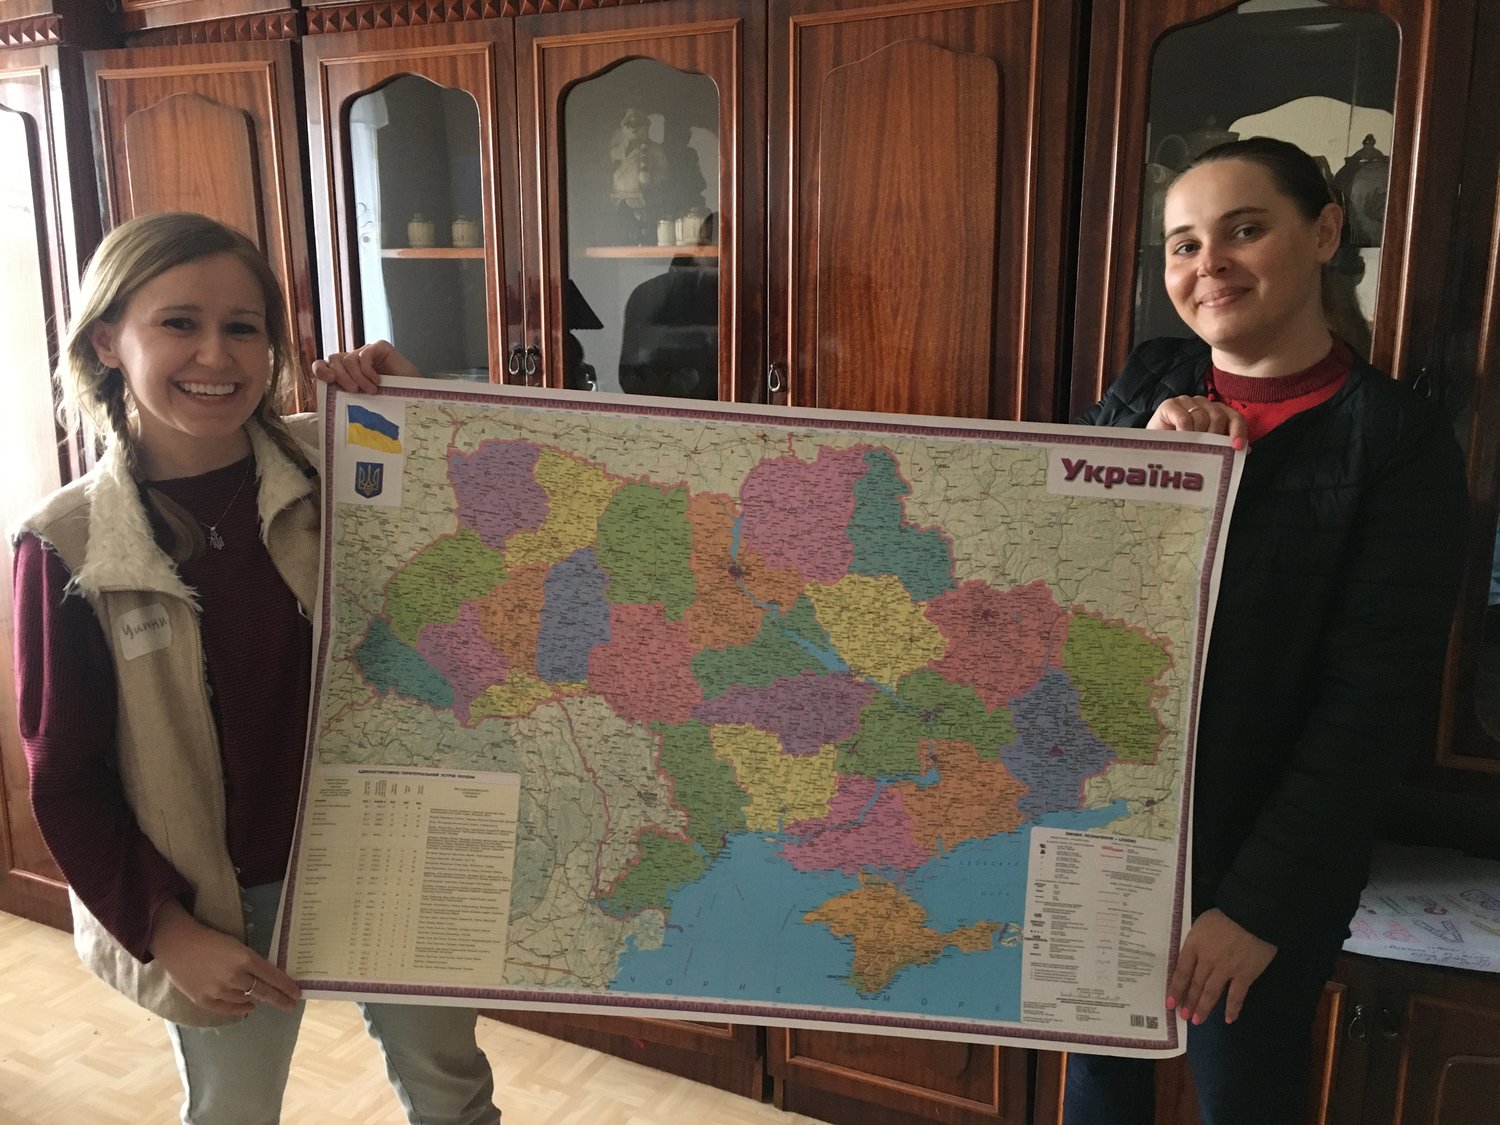 Whitney Cravens (left), who served with the U.S. Peace Corps in Ukraine, helps display a Ukrainian map.